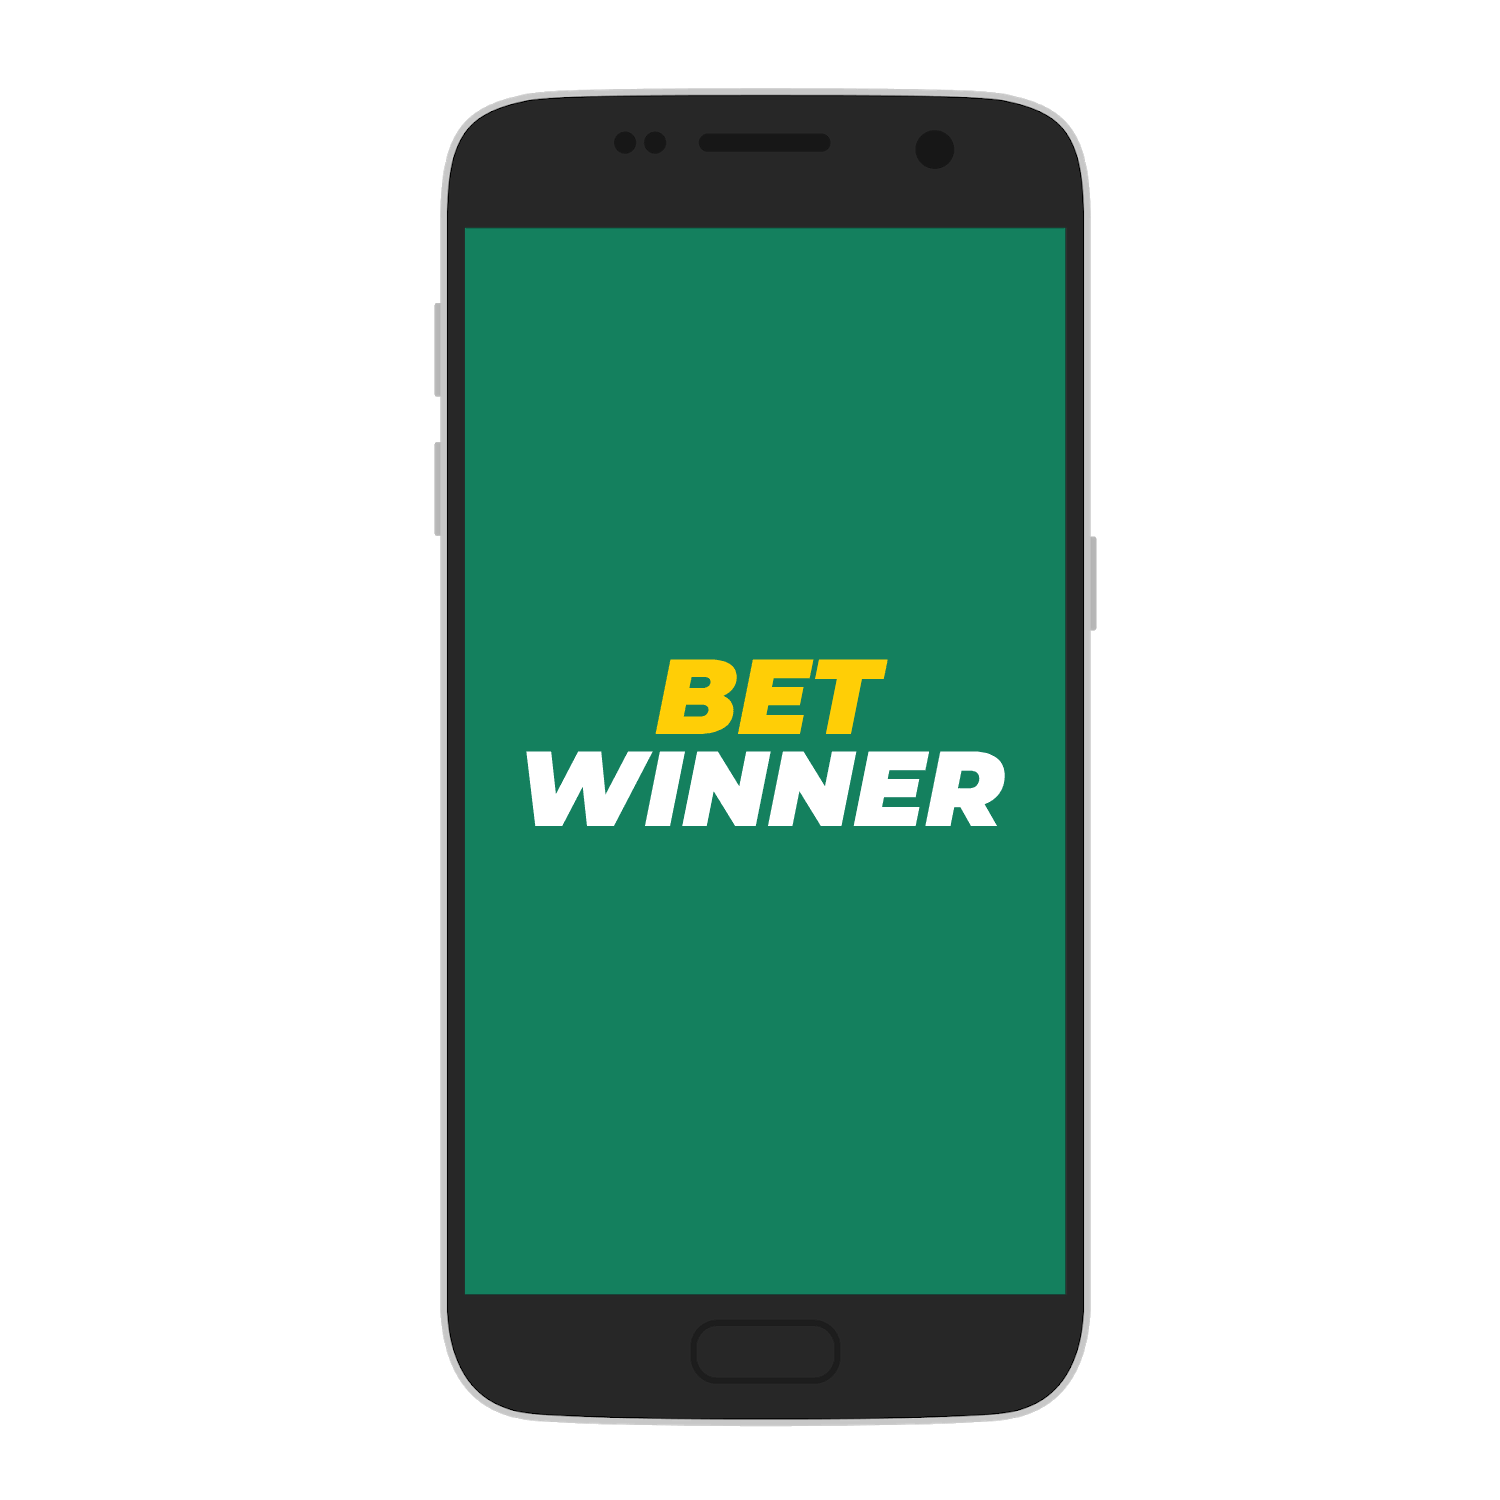 Install the Betwinner app and start betting on sport via your mobile phone.